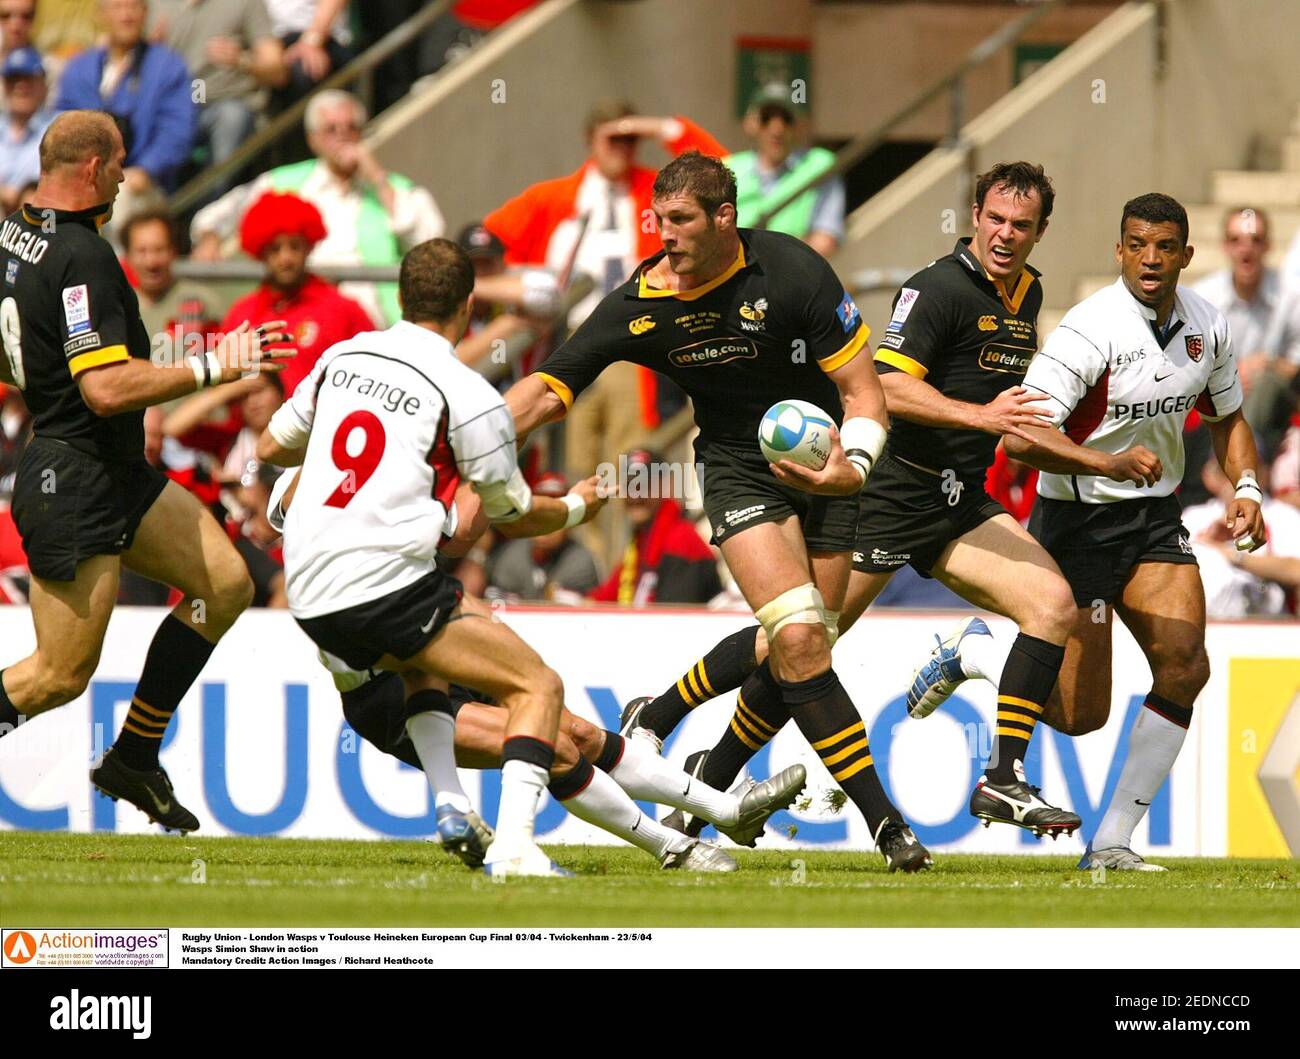 Rugby Union - London Wasps v Toulouse Heineken European Cup Final 03/04 -  Twickenham - 23/5/04 Wasps Simion Shaw in action Mandatory Credit: Action  Images / Richard Heathcote Stock Photo - Alamy